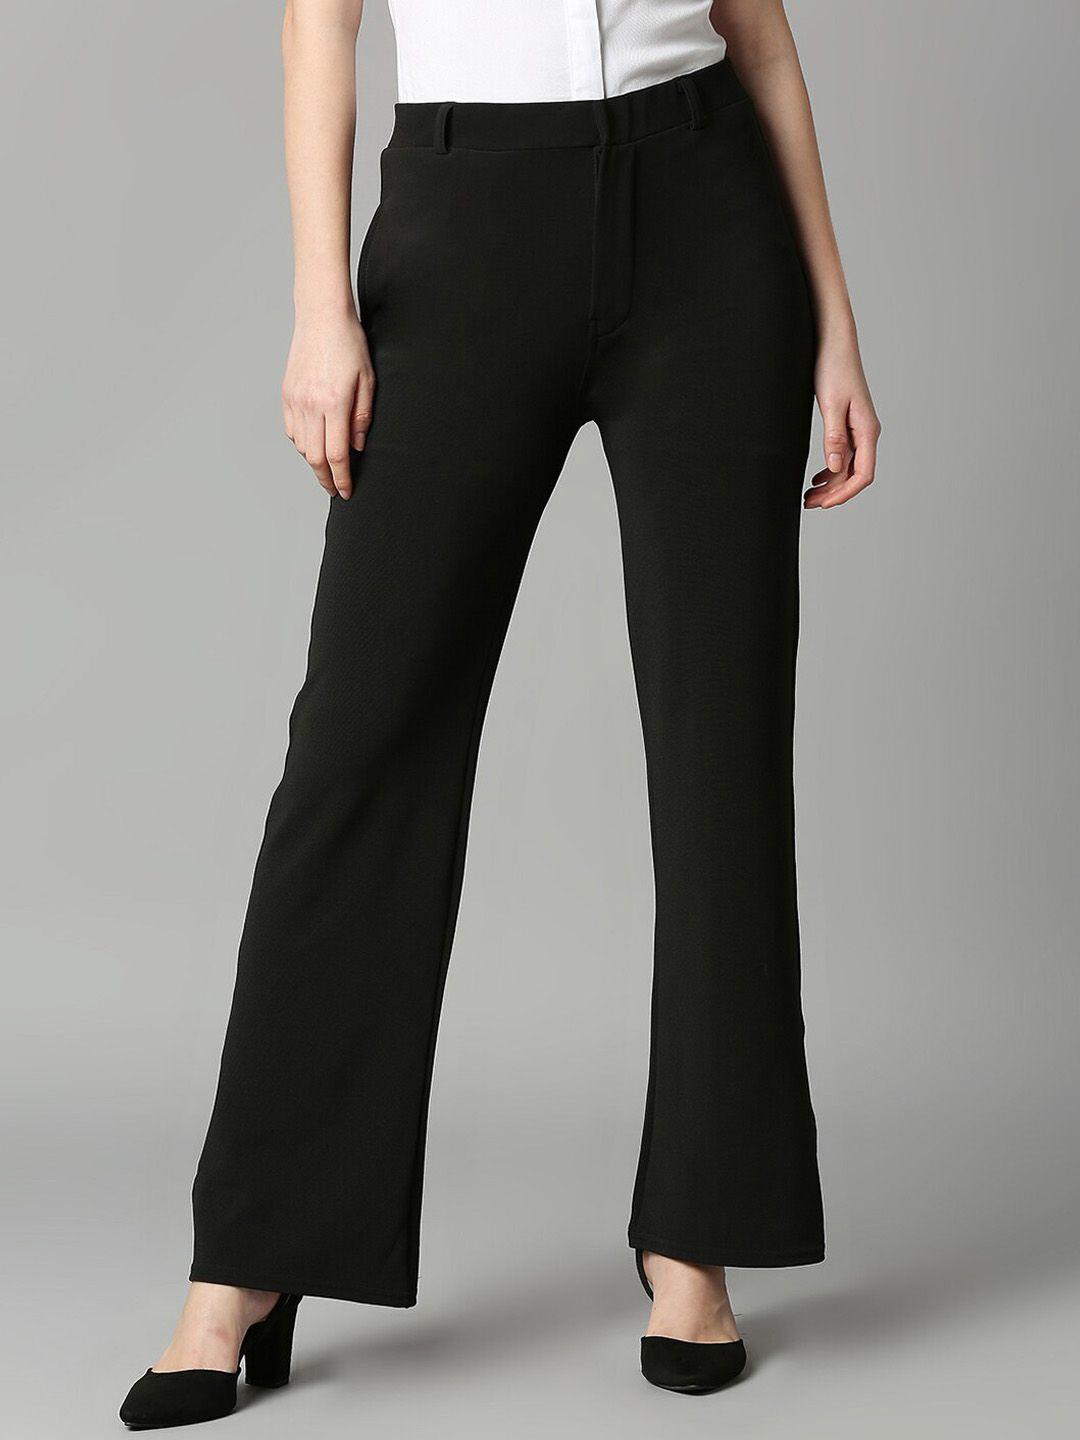 smarty-pants-women-relaxed-cotton-formal-trousers